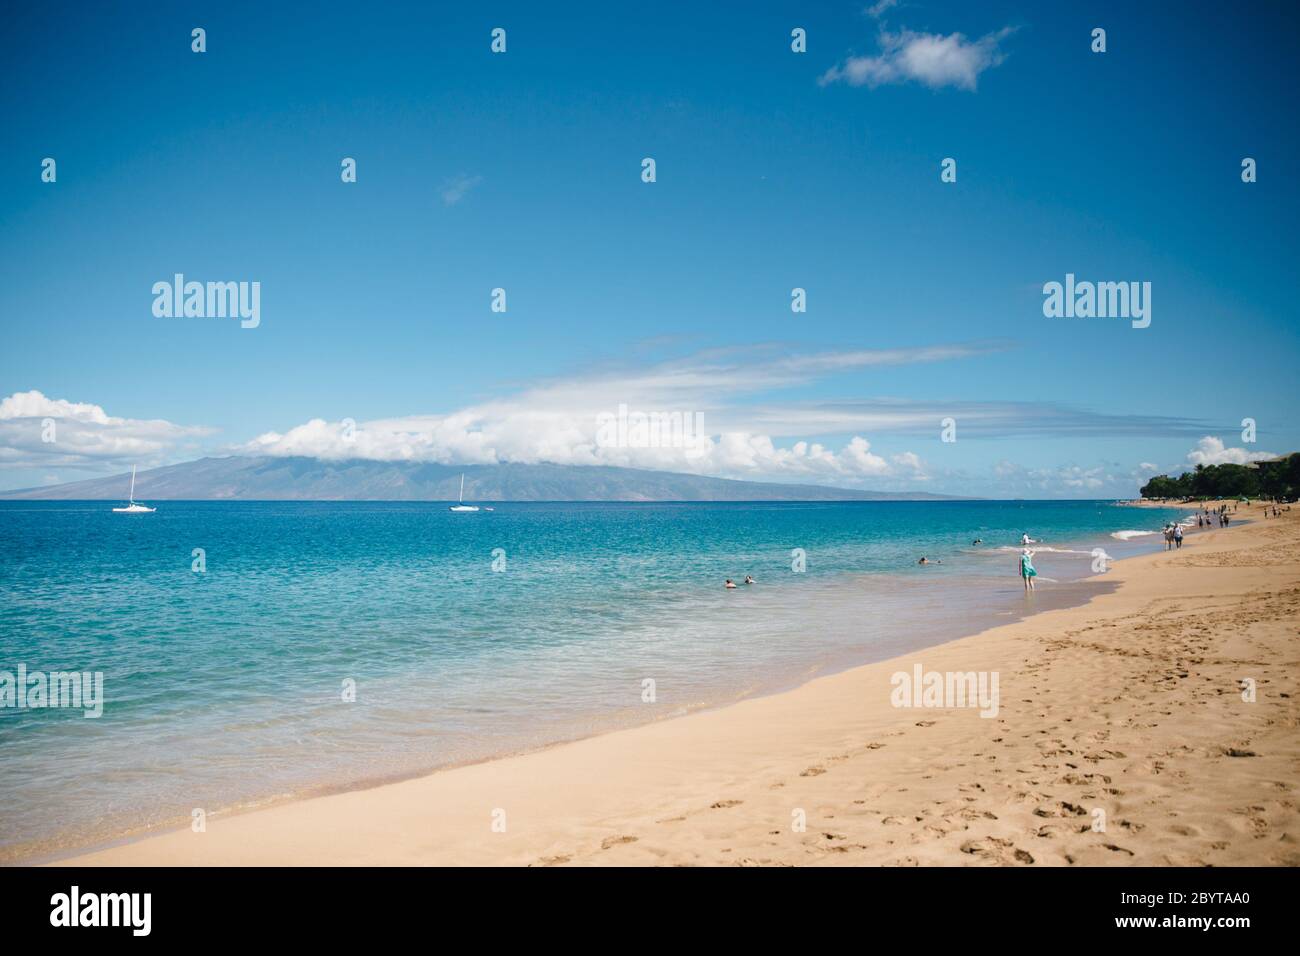 Clear Blue Waters of Kaanapali Beach on the Island of Maui, Hawaii during the daytime with a single person walking Stock Photo